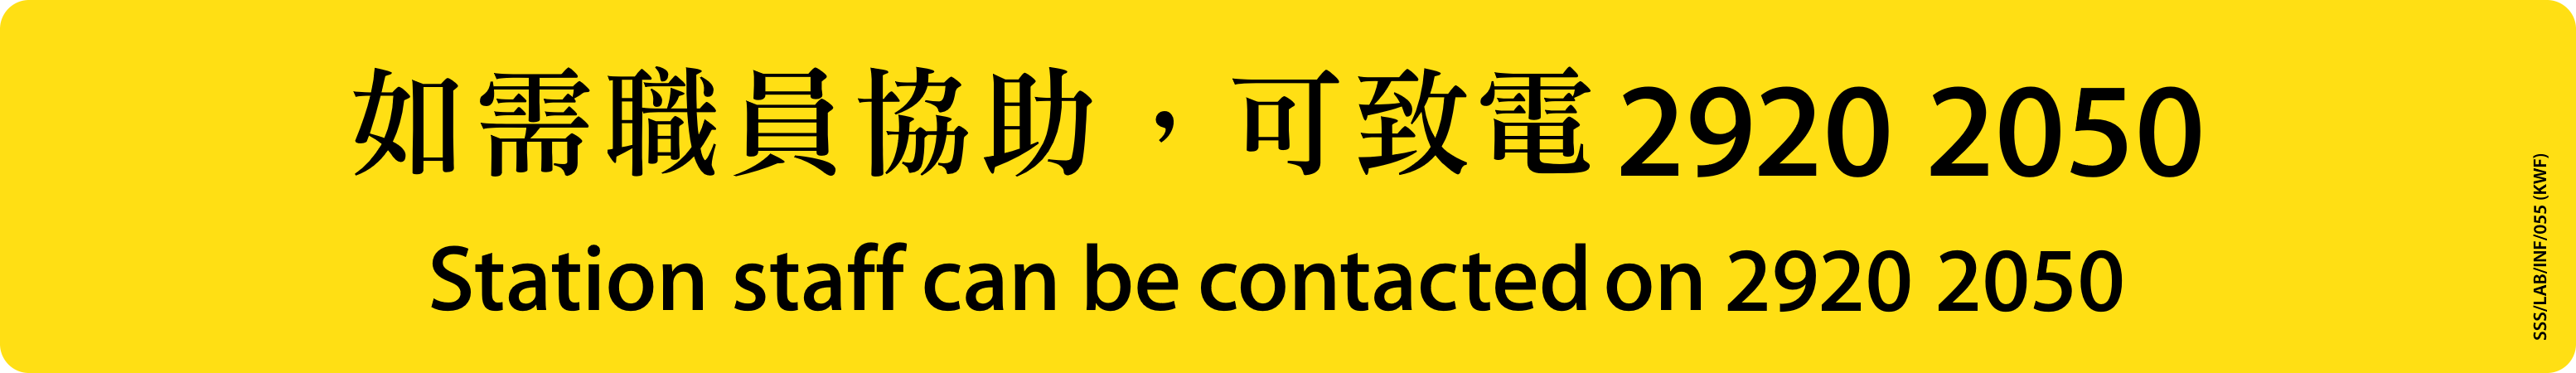 MTR sticker: Station staff can be contacted on 2920 2050